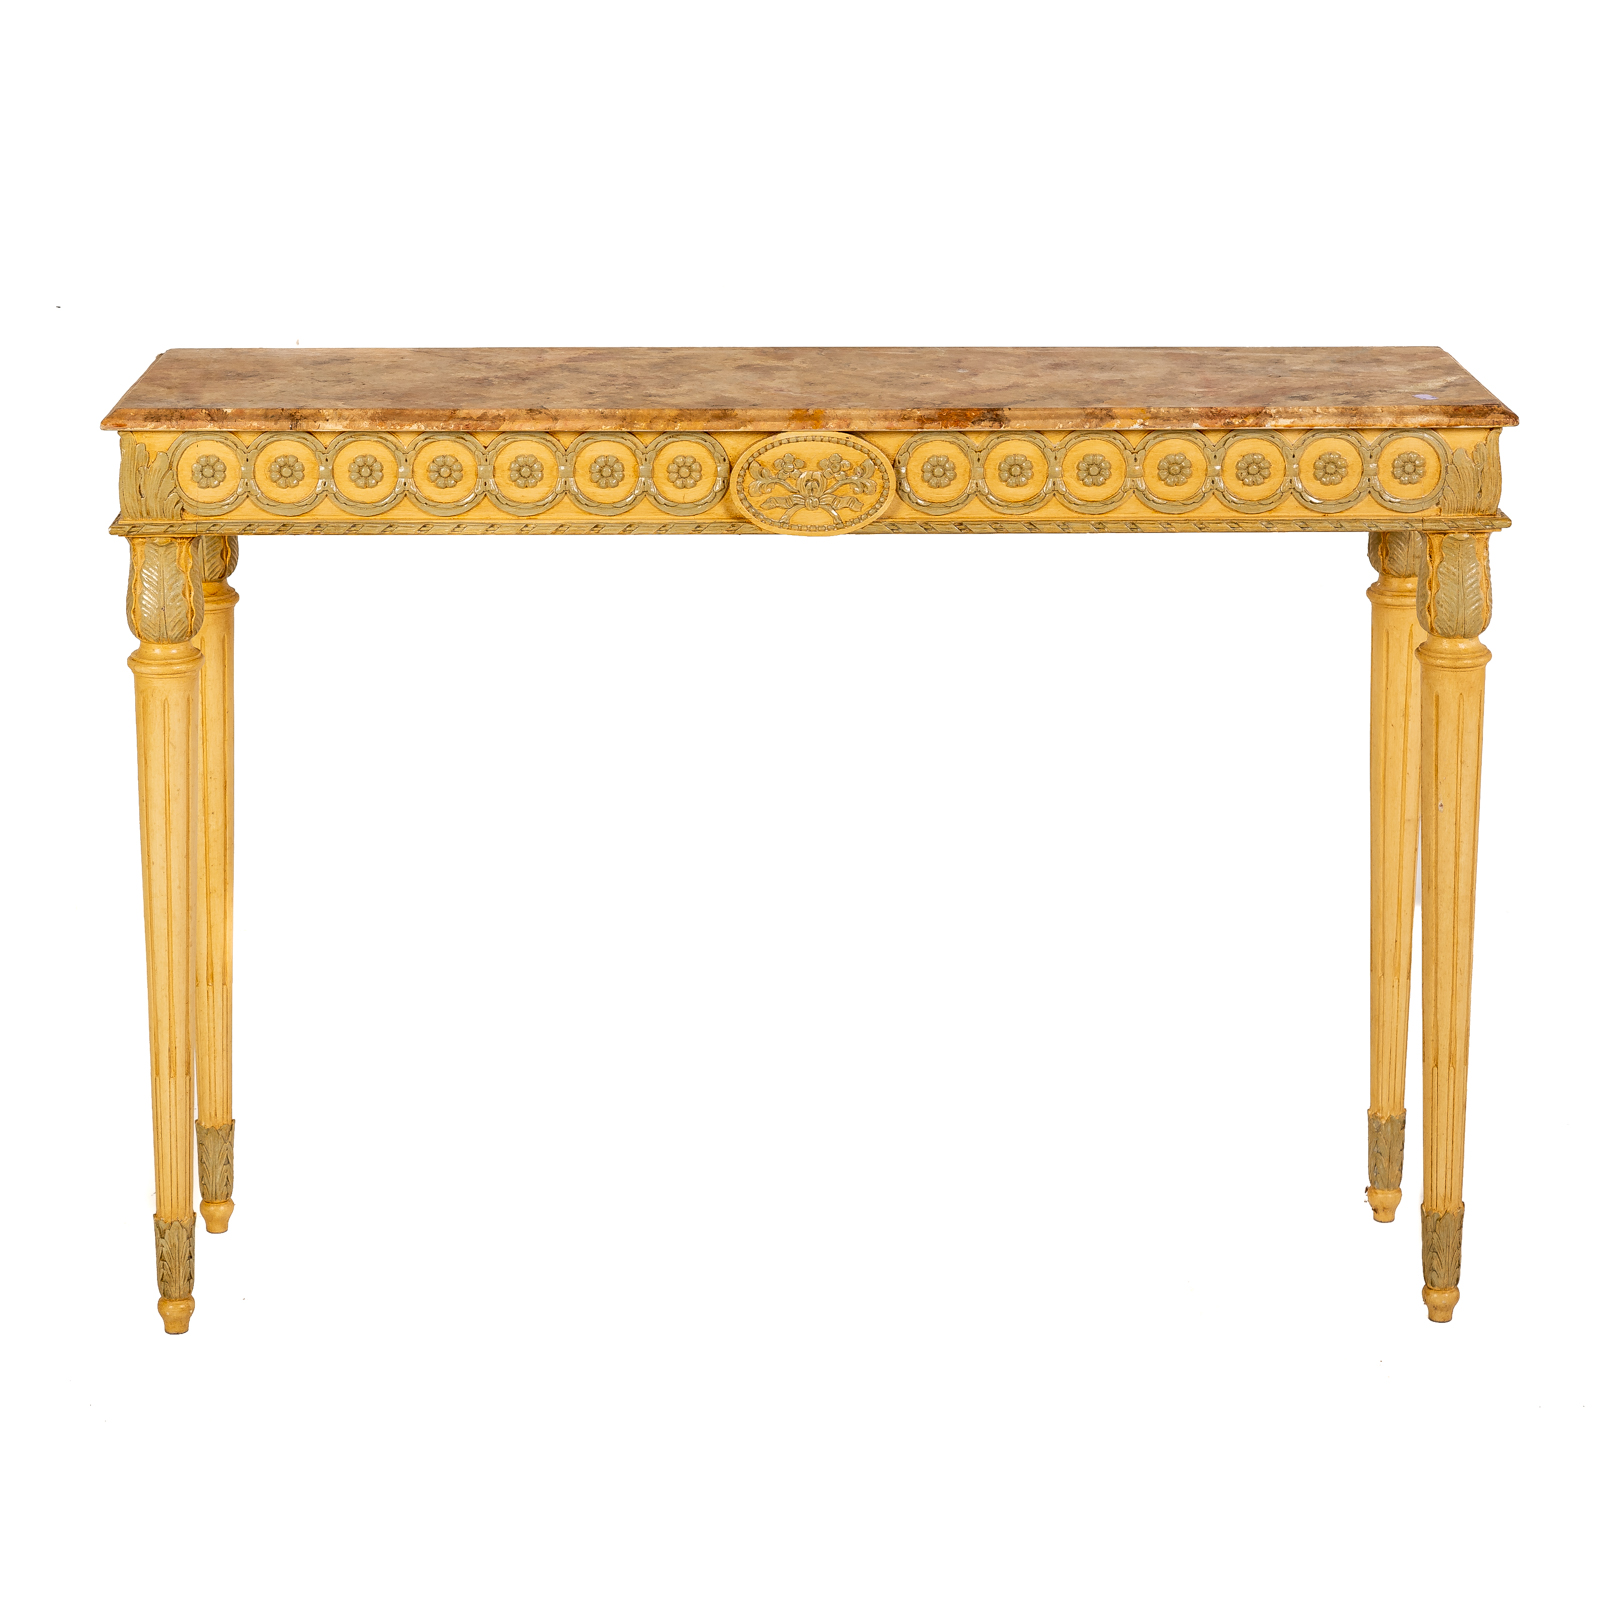 LOUIS XVI STYLE PAINTED WOOD CONSOLE